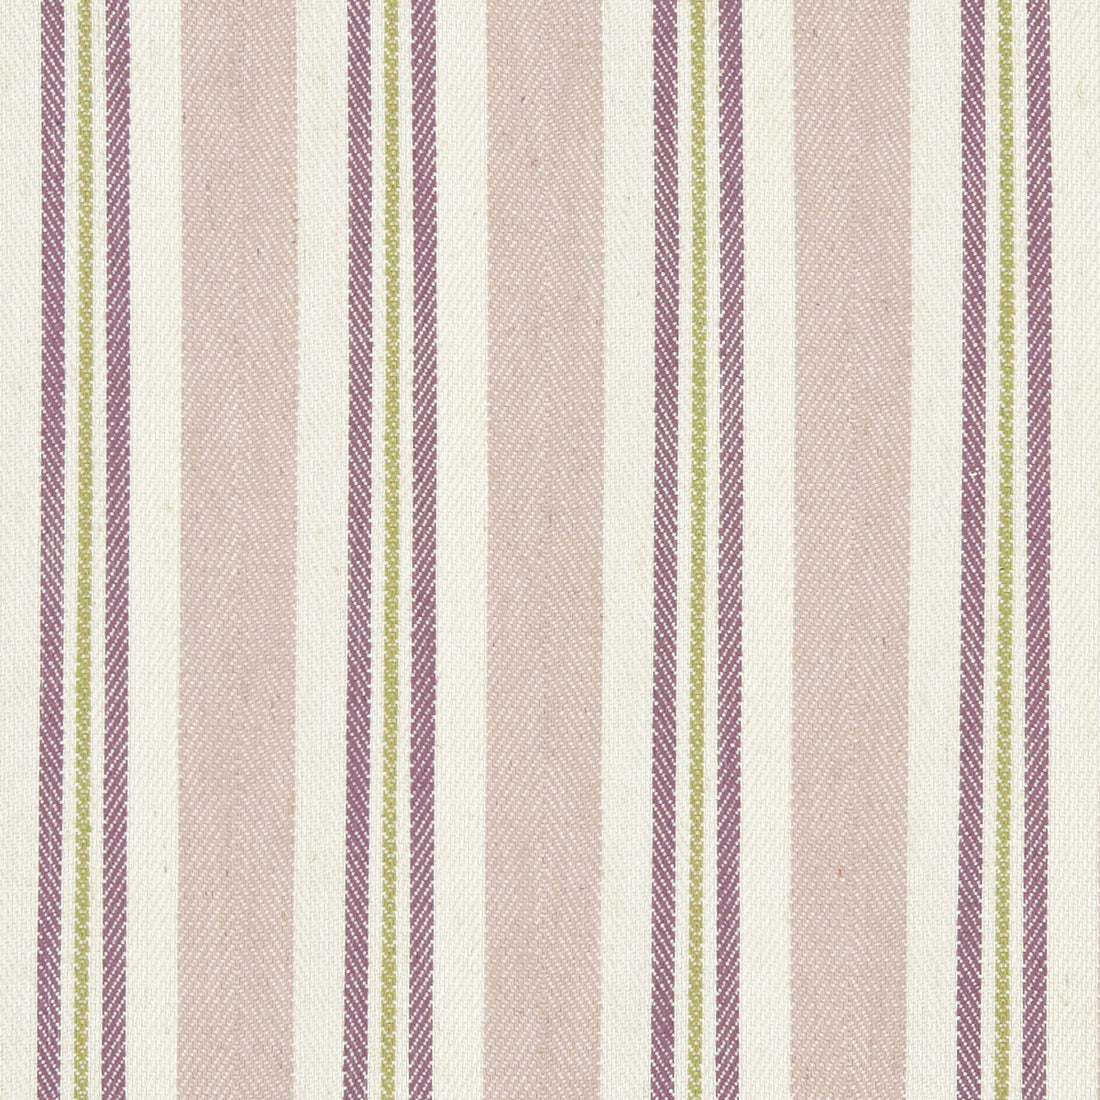 Alderton fabric in damson/heather color - pattern F1119/01.CAC.0 - by Clarke And Clarke in the Clarke &amp; Clarke Avebury collection